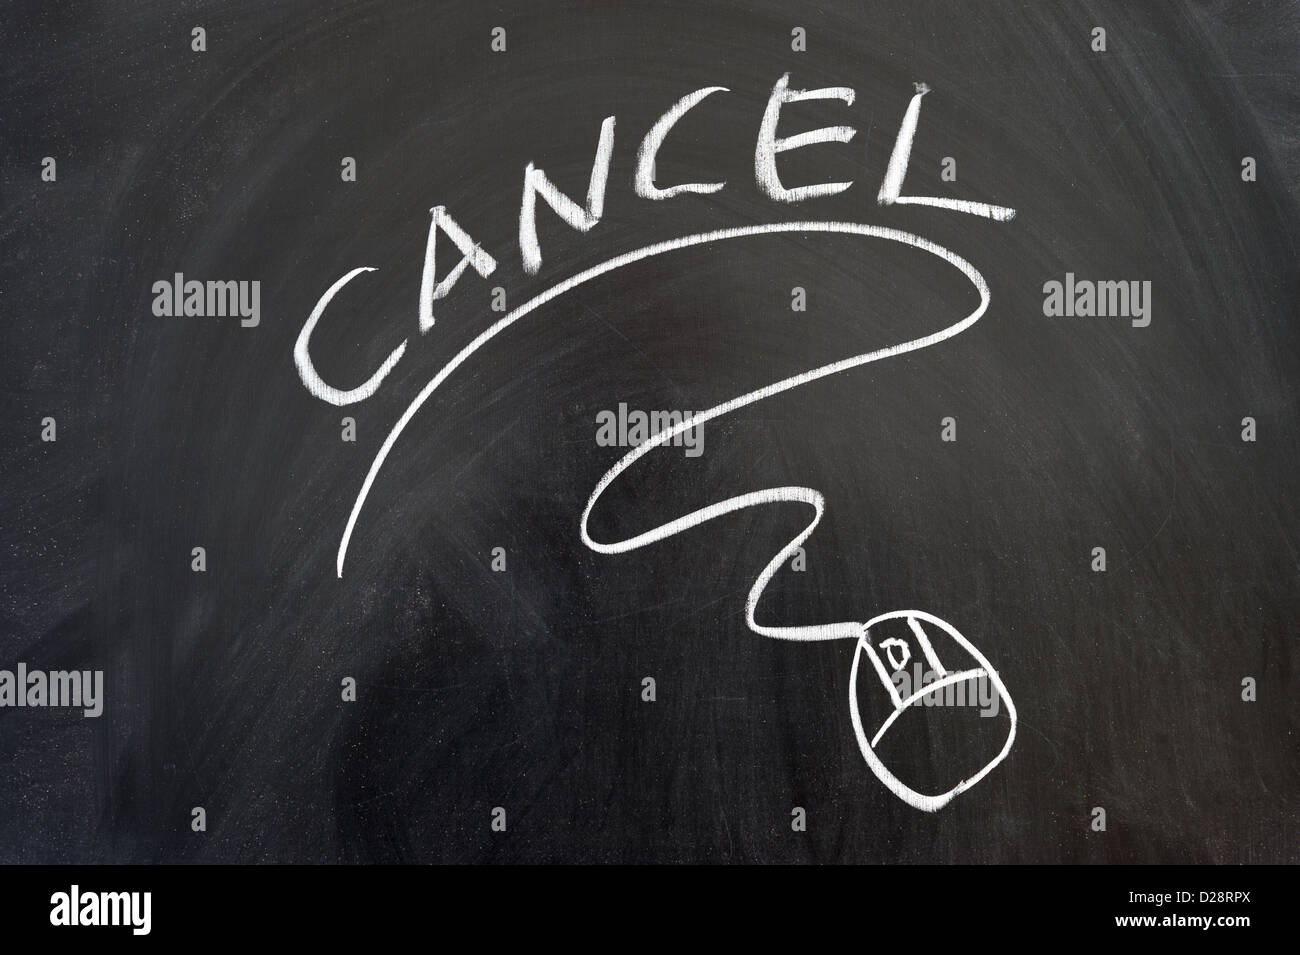 Cancel word and mouse sign drawn on the blackboard Stock Photo